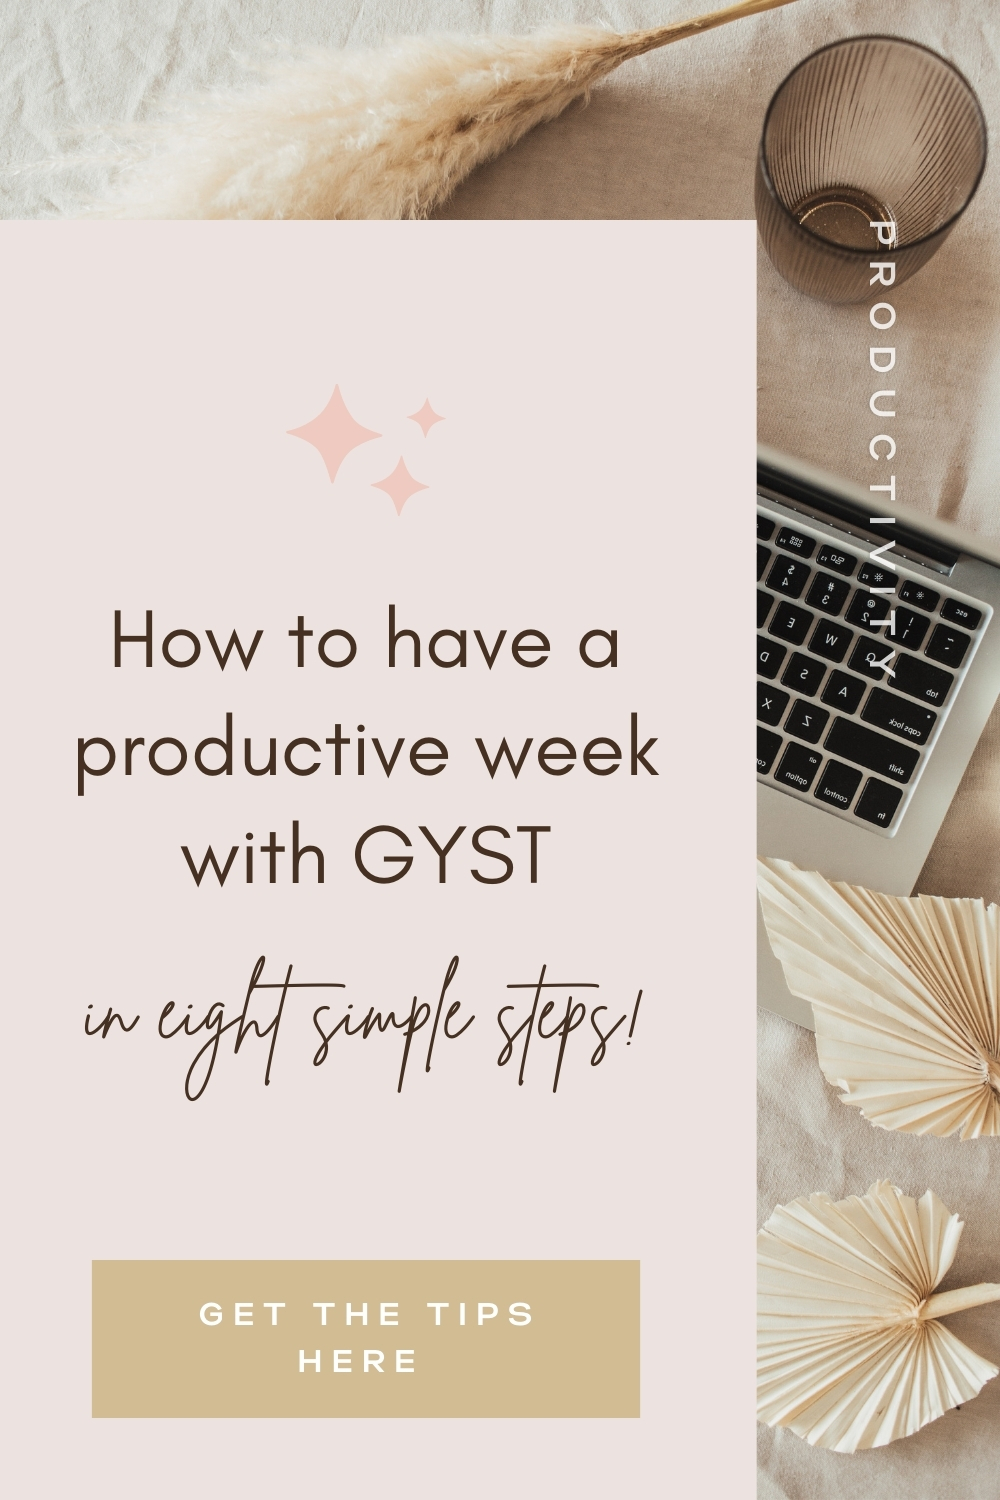 How To Have A Productive Week With GYST